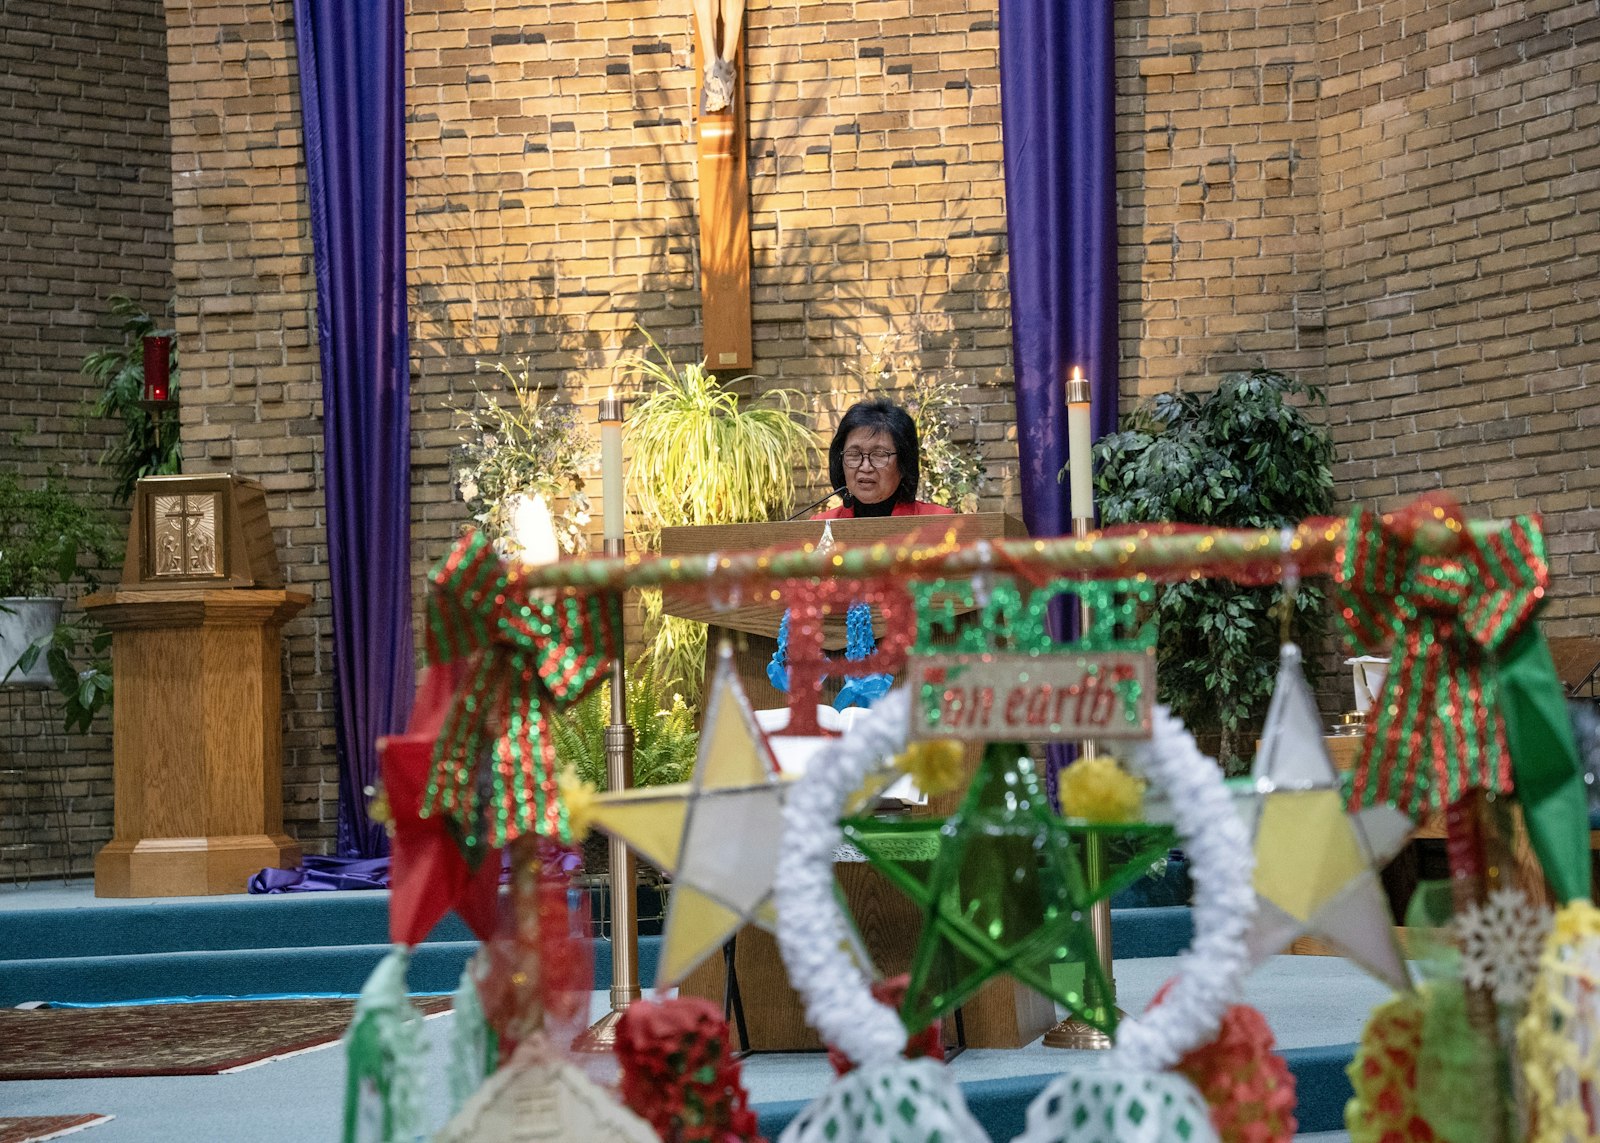 The sanctuary is decorated for Advent inside St. Mary, Cause of Our Joy Parish in Westland. Other parishes to observe the tradition of Simbang Gabi include St. Aloysius in Detroit, St. Rene Goupil in Sterling Heights, and St. Ignatius in the Cayman Islands.